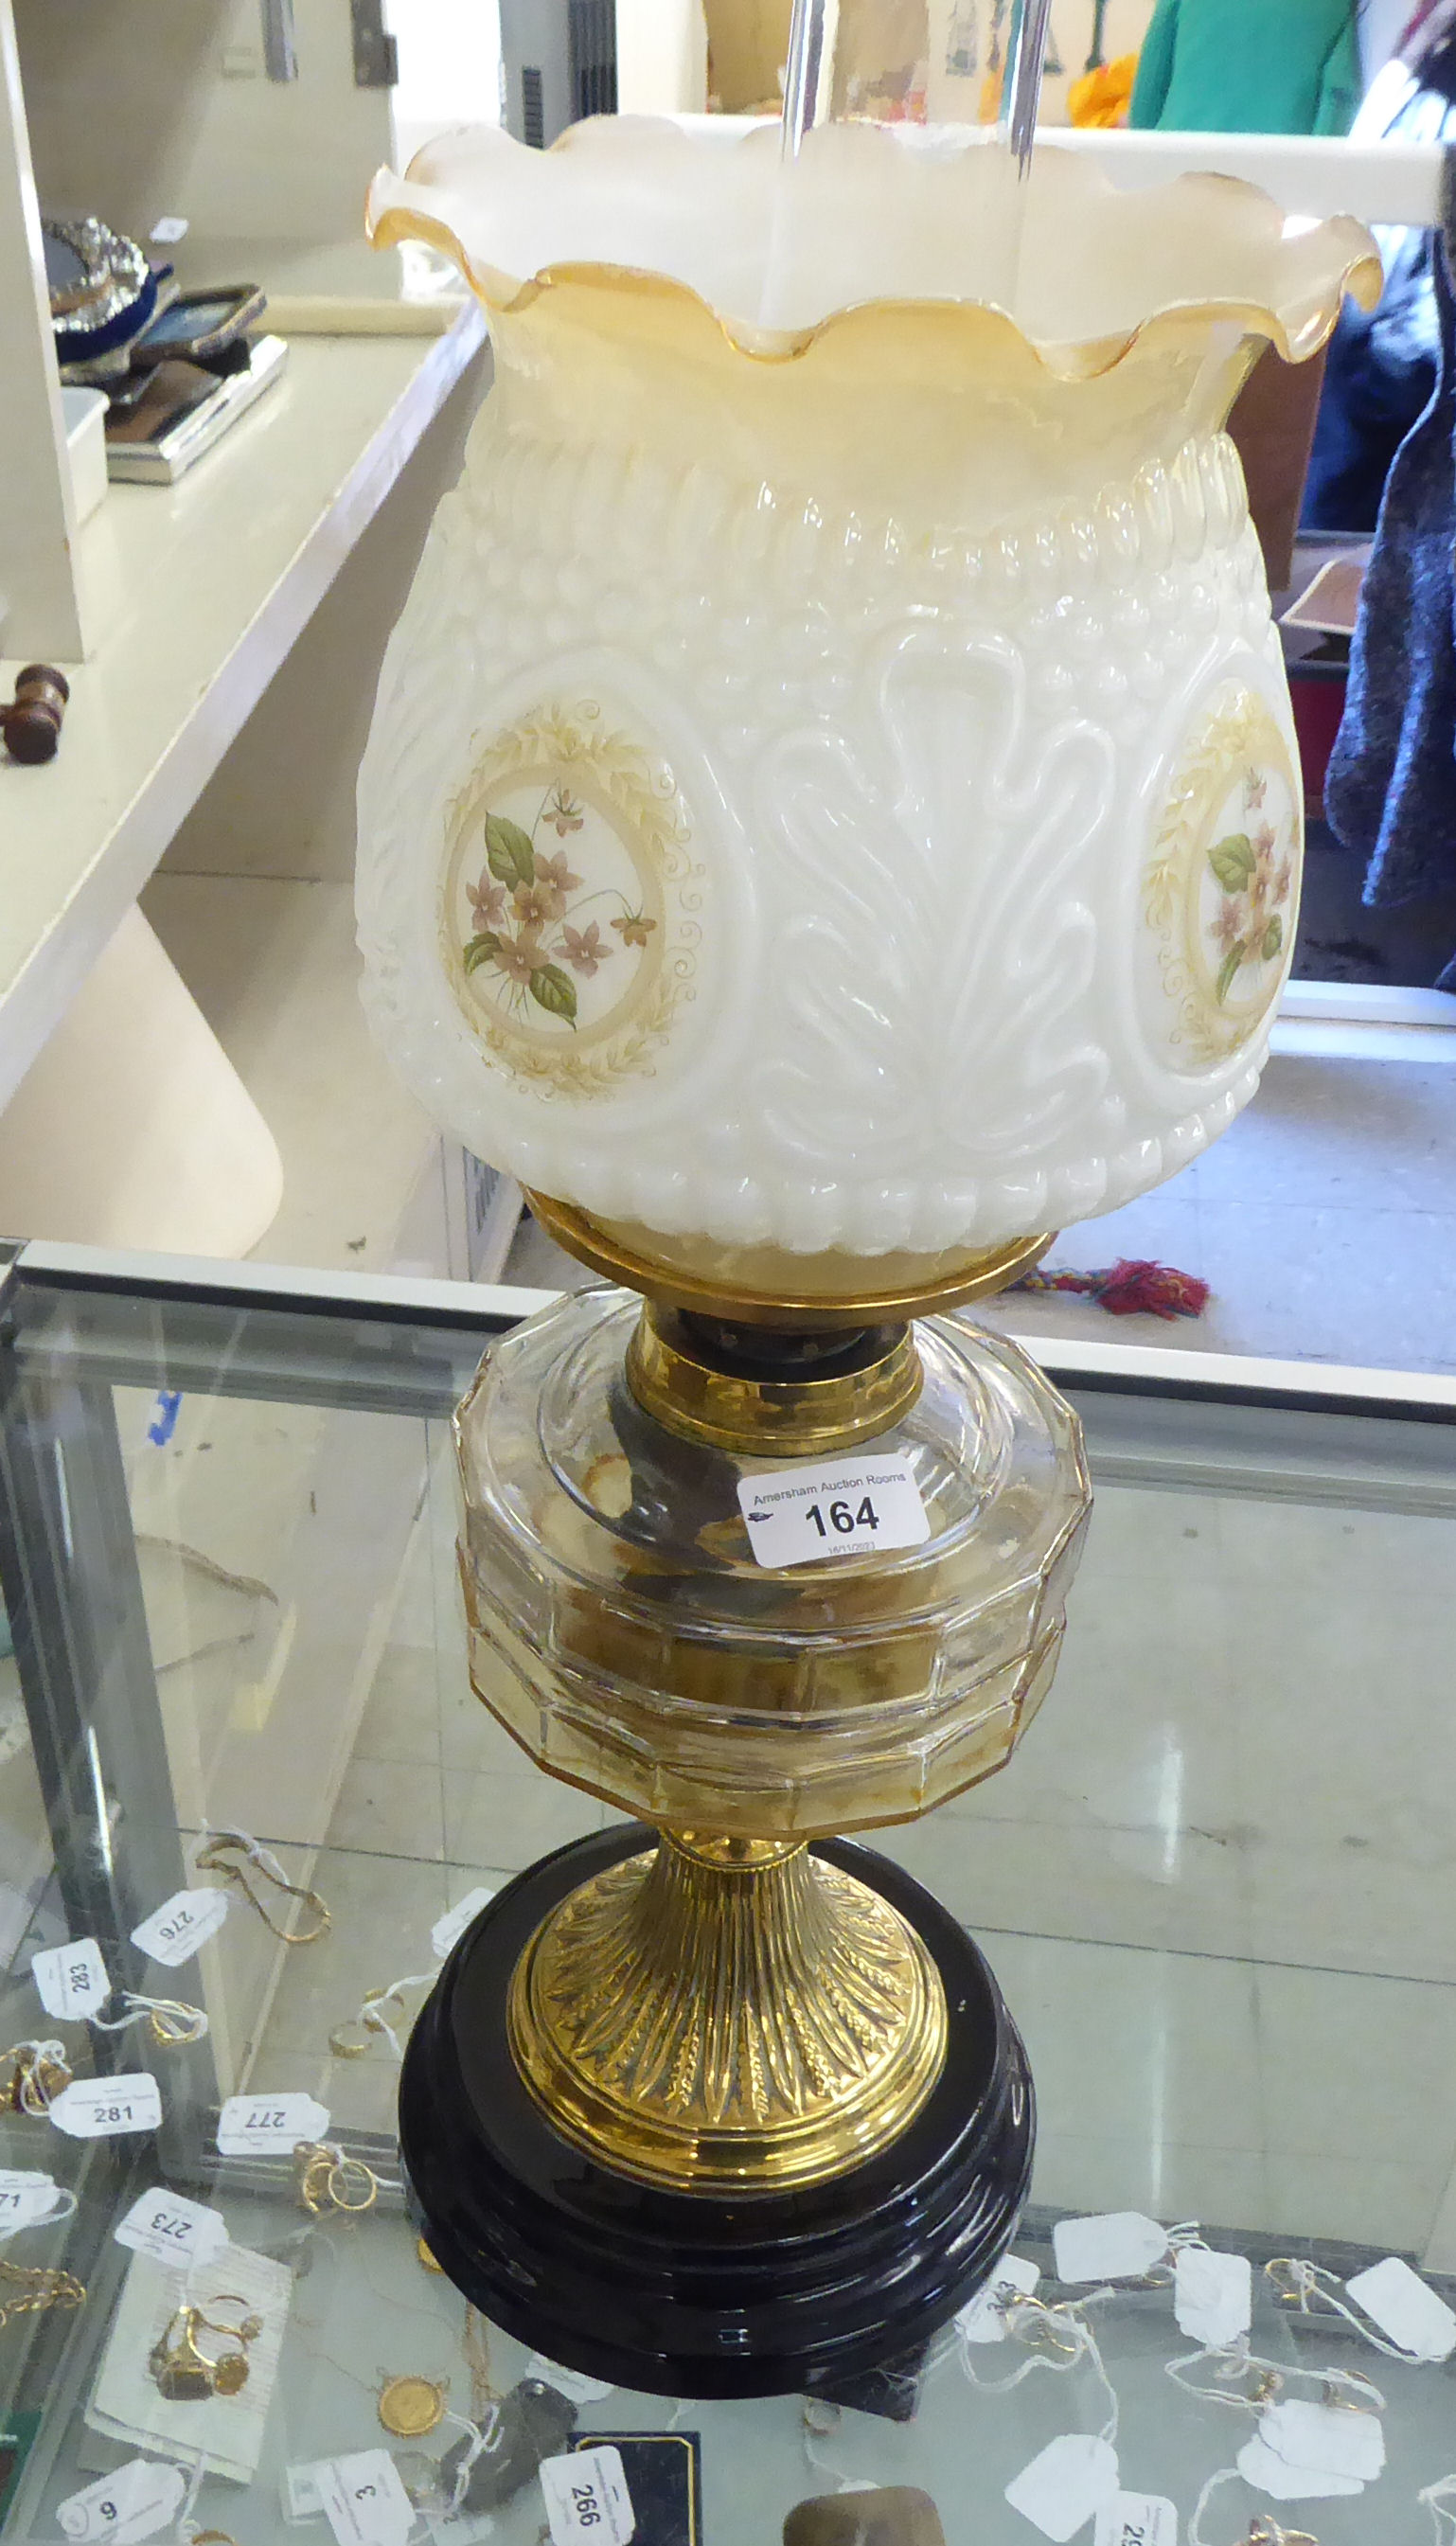 A late Victorian brass oil lamp with a moulded glass reservoir, on a pedestal base and black ceramic - Image 2 of 2